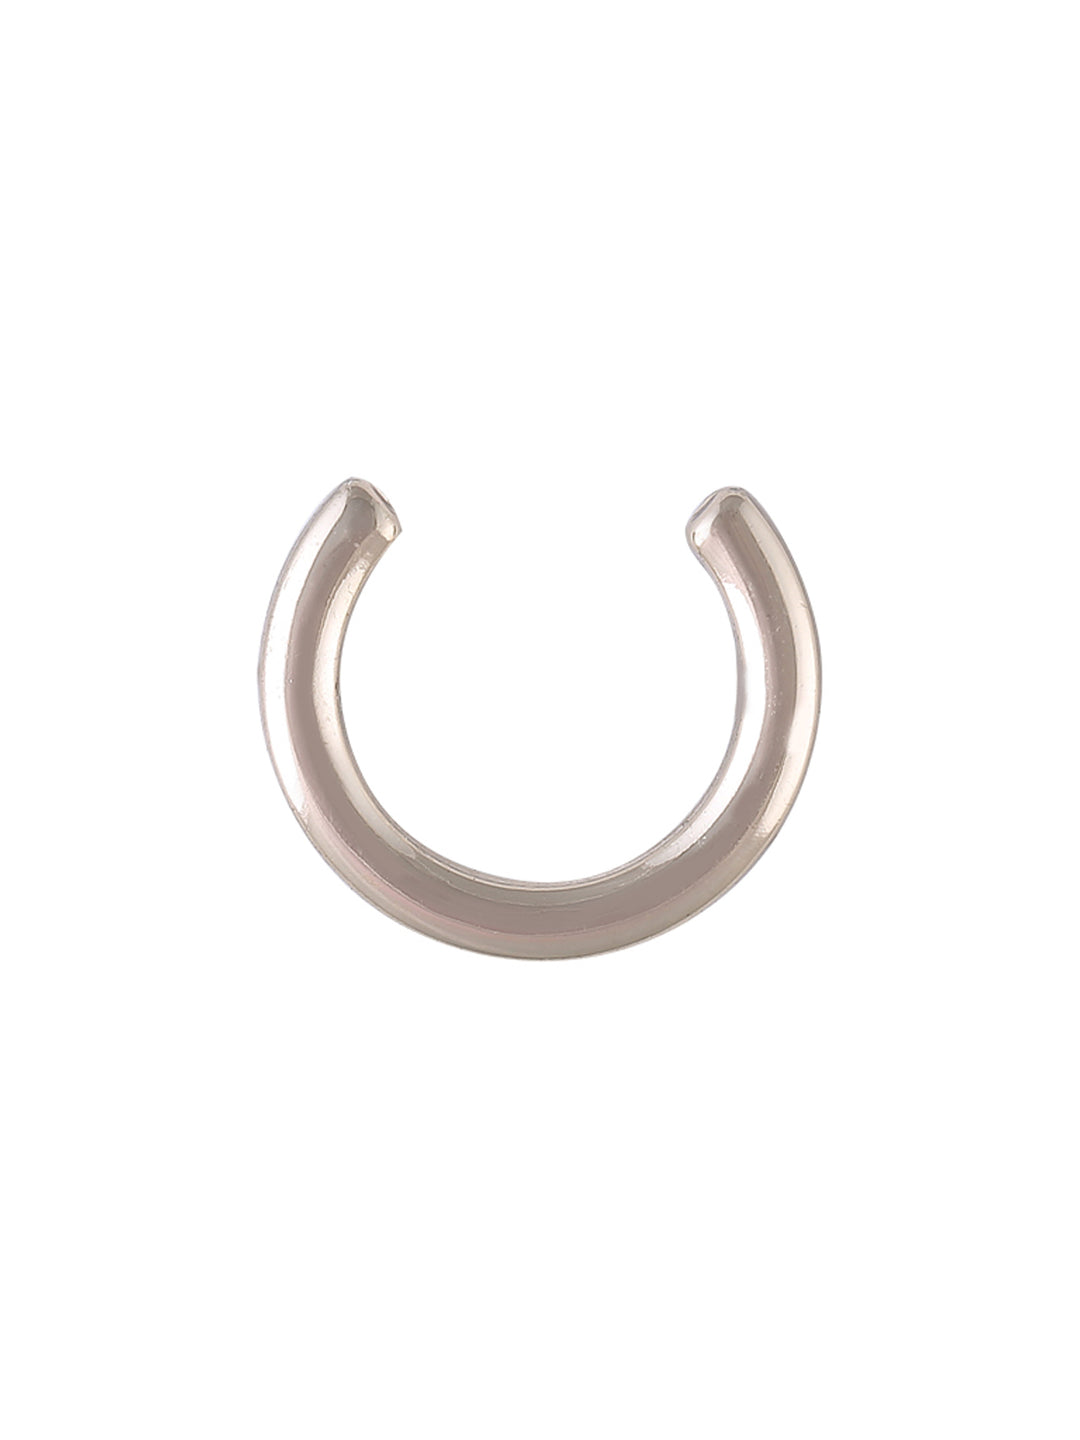 Horseshoe Shape Classic Half-Ring Button in Shiny Golden Color